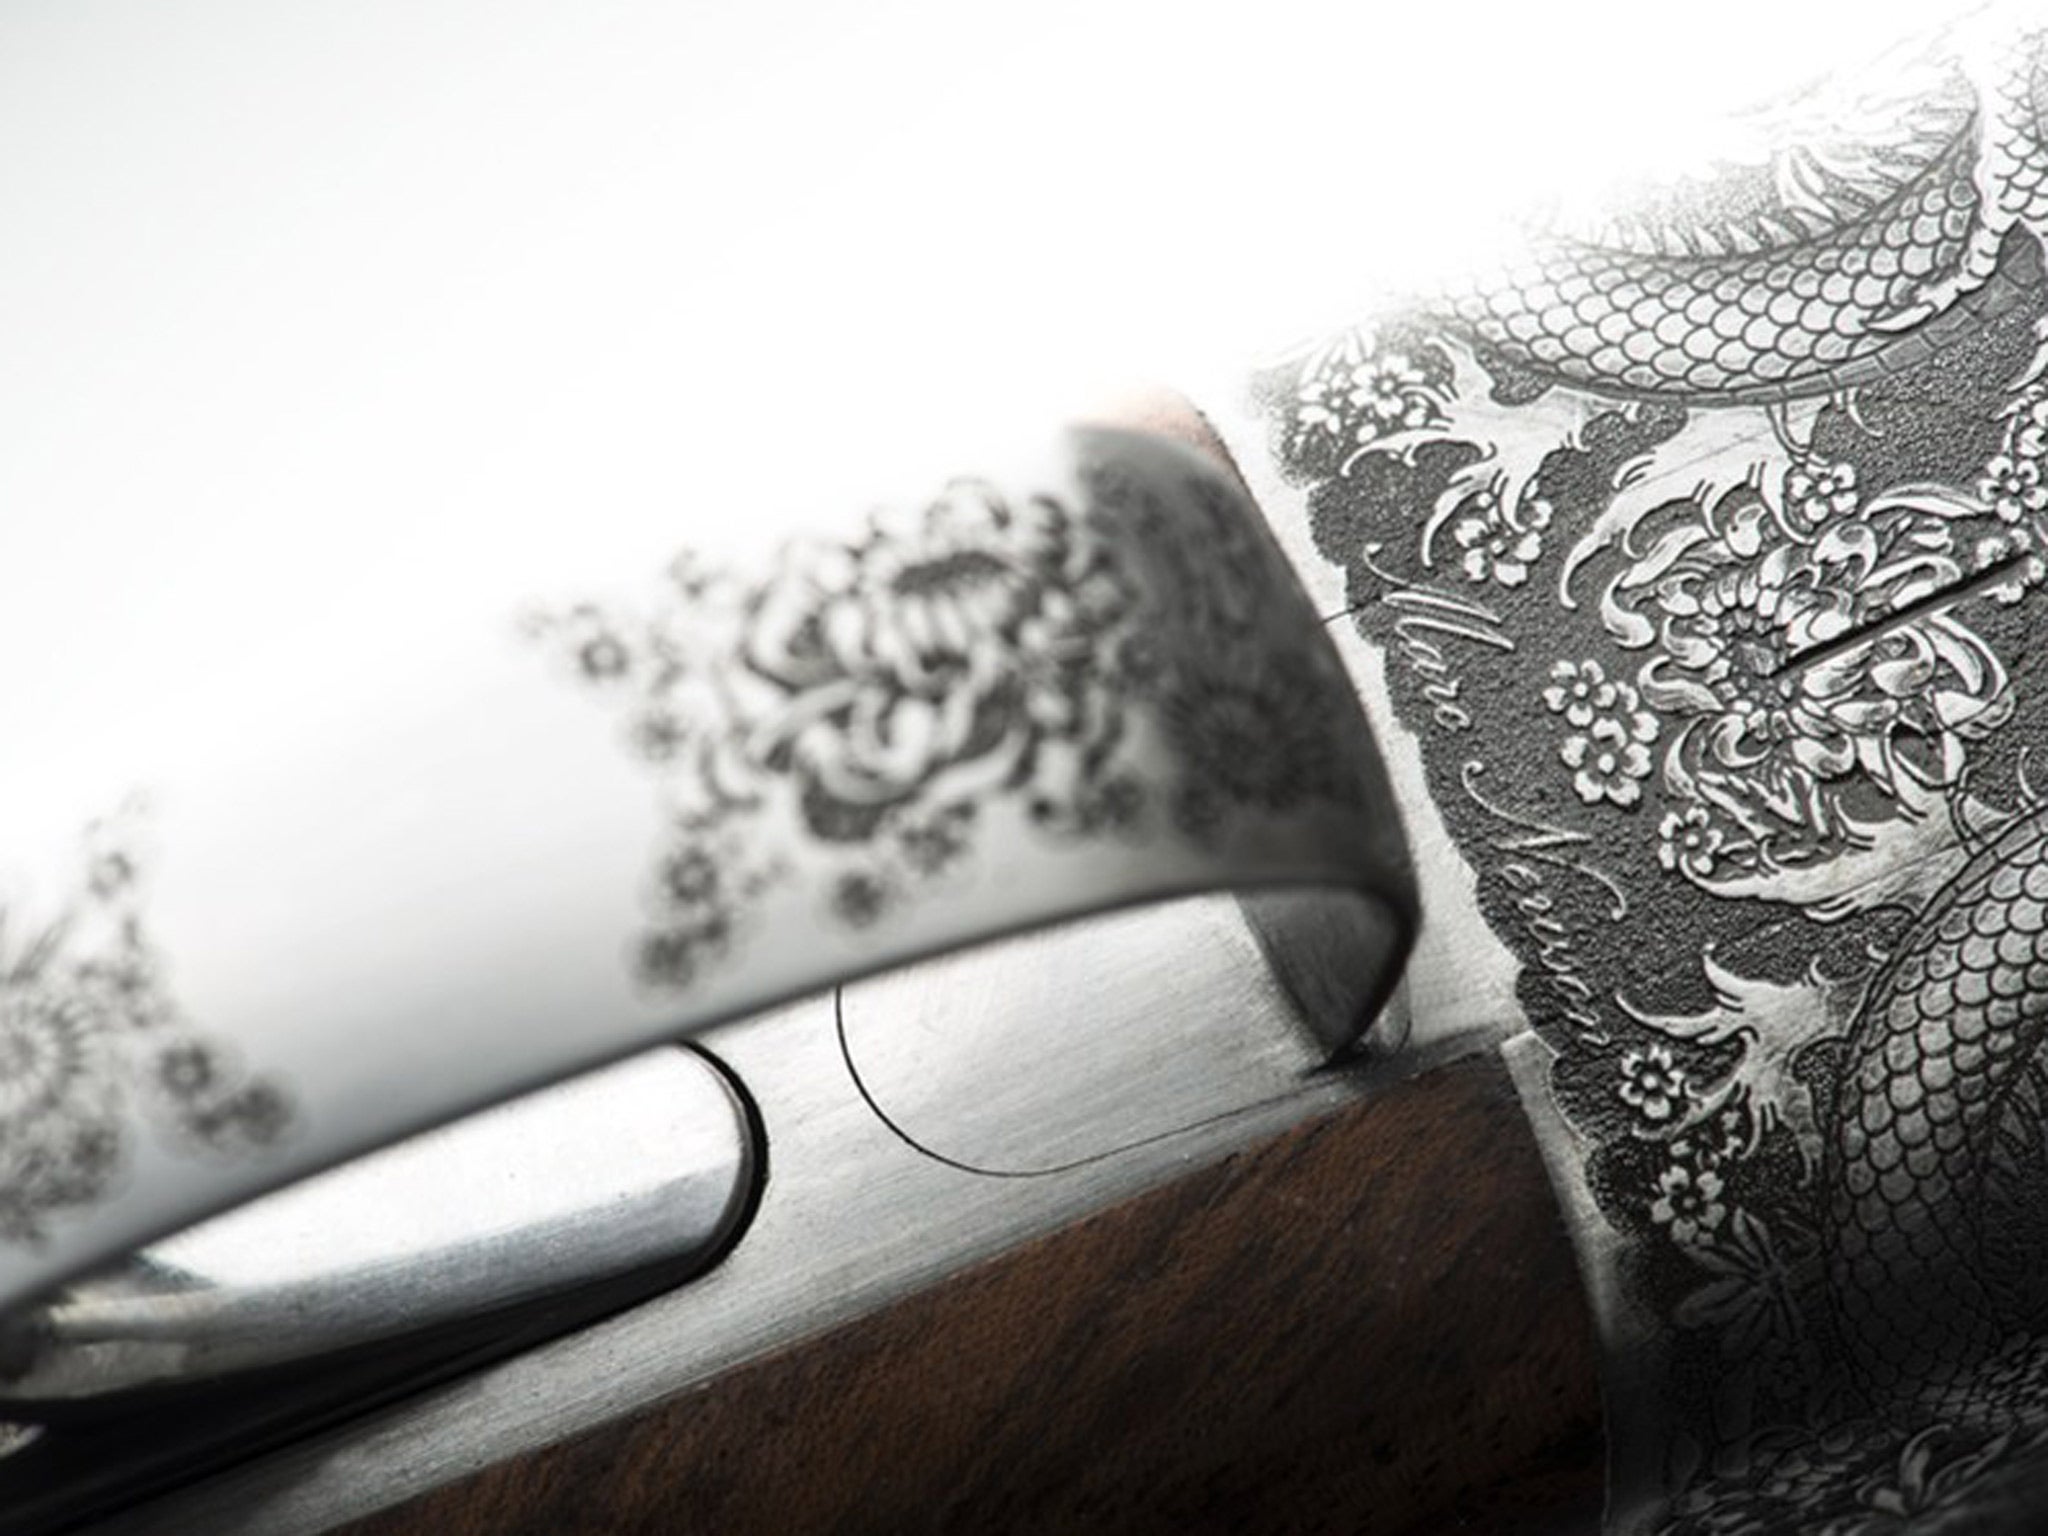 Newson's design includes engravings inspired by traditional Japanese hunting scenes. Source: Beretta